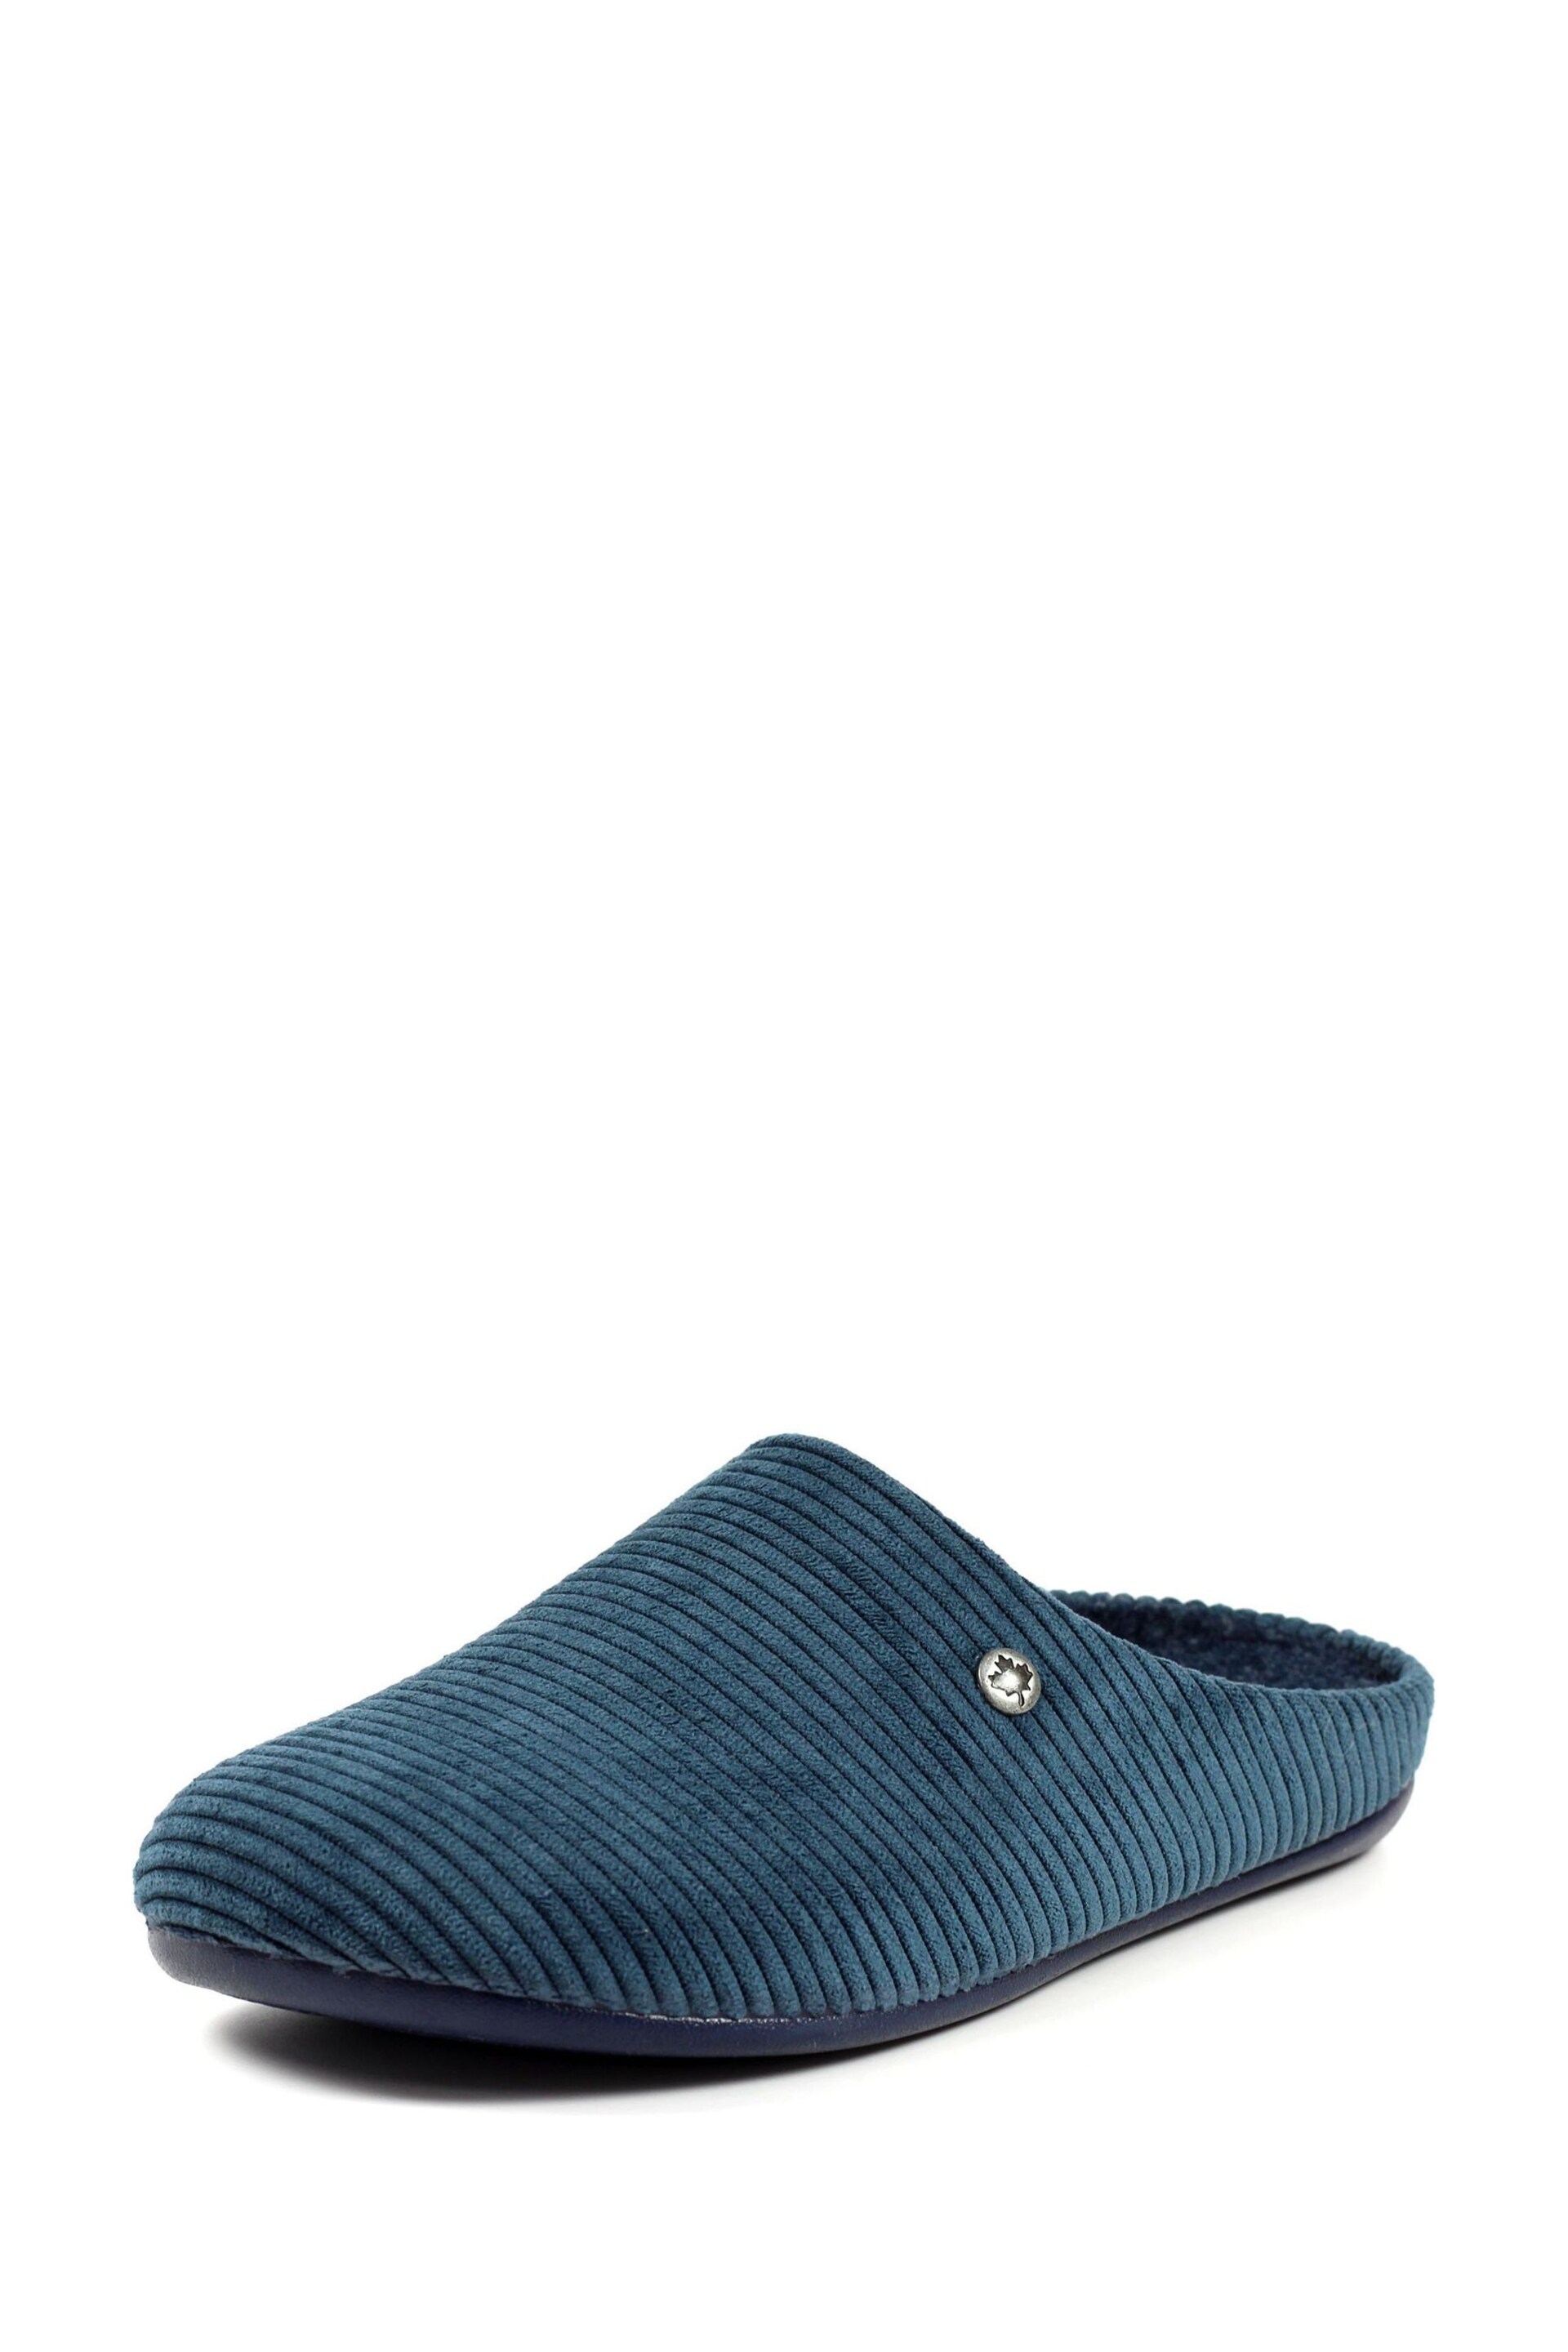 Goodyear Blue Marlow Mule Slippers - Image 2 of 7